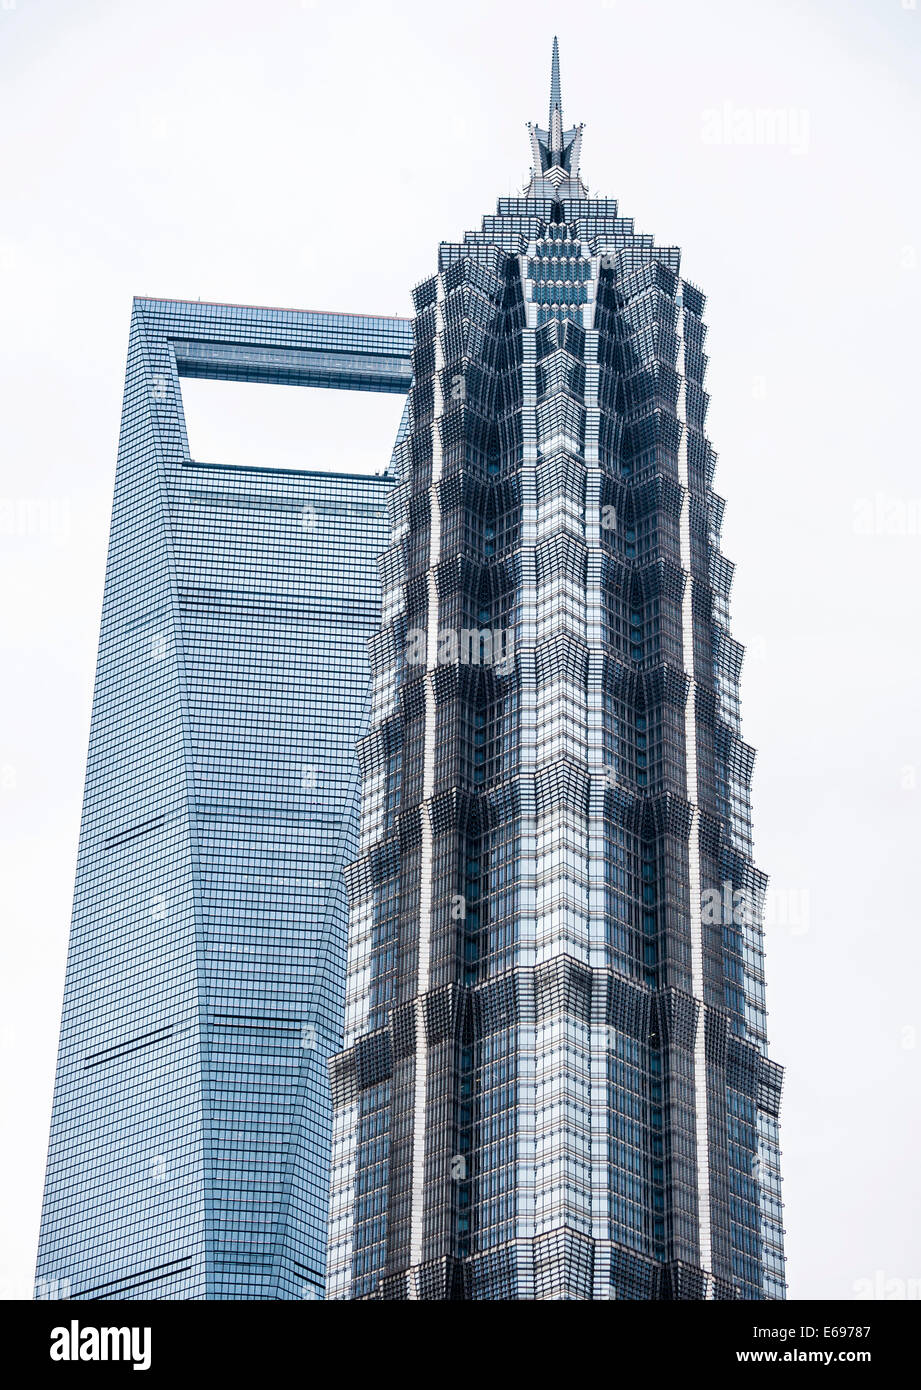 World Financial Center and Jin Mao Tower, Pudong, Shanghai, China Stock Photo